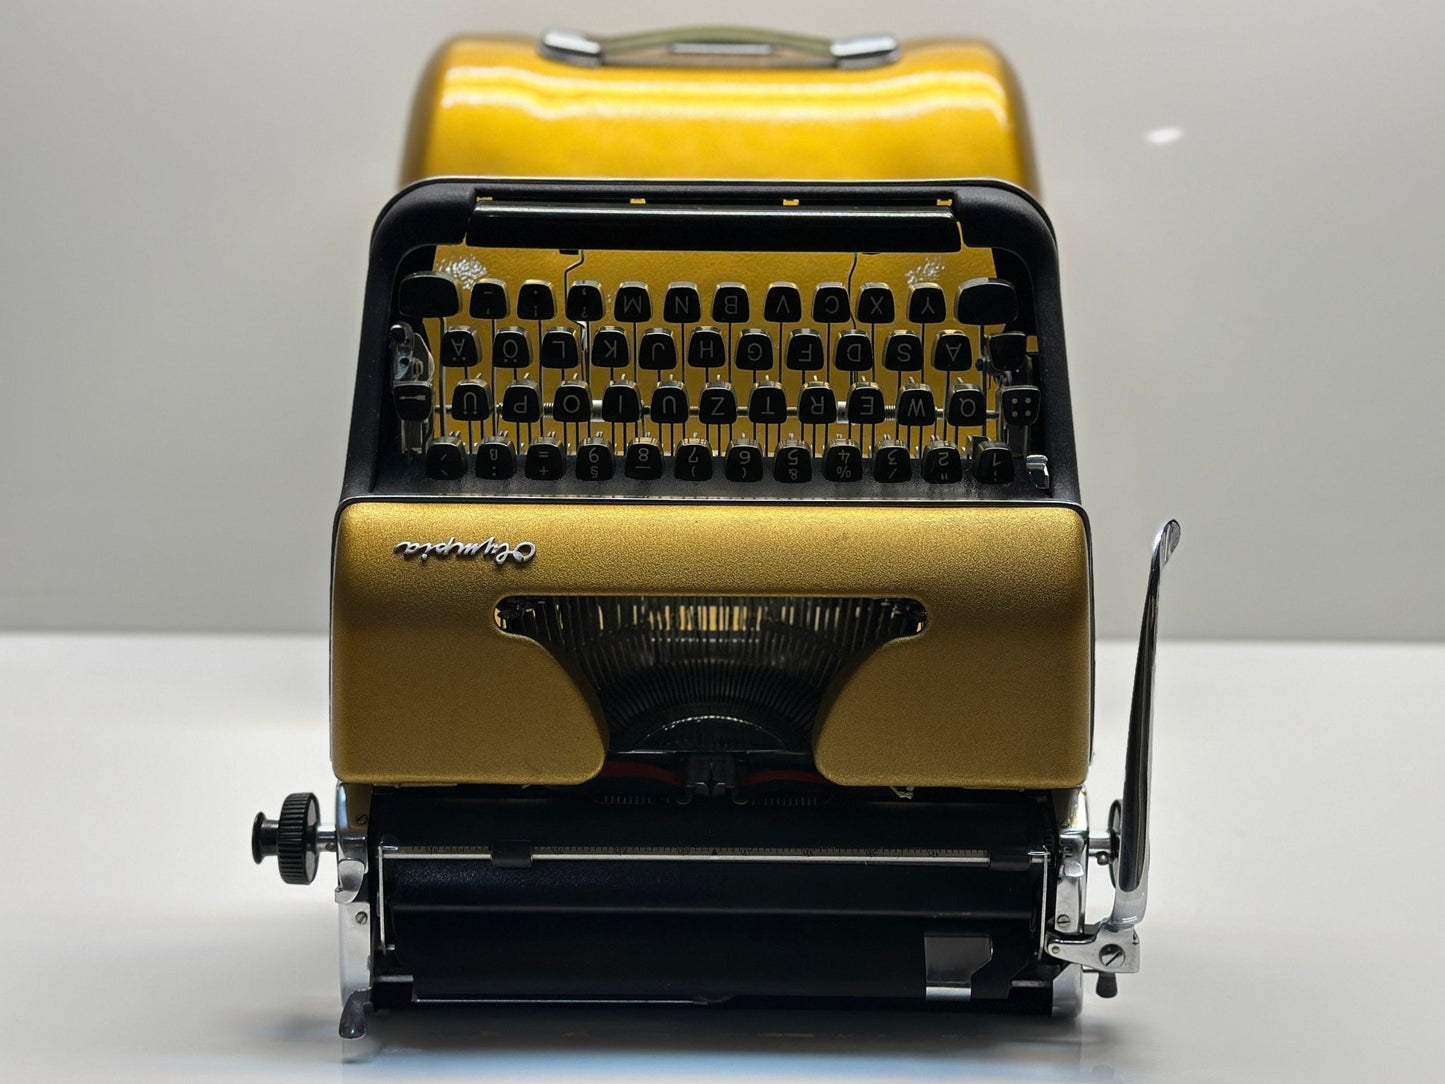 Gold Olympia SM3 Typewriter + Gold Bag - The Perfect Gift Choice